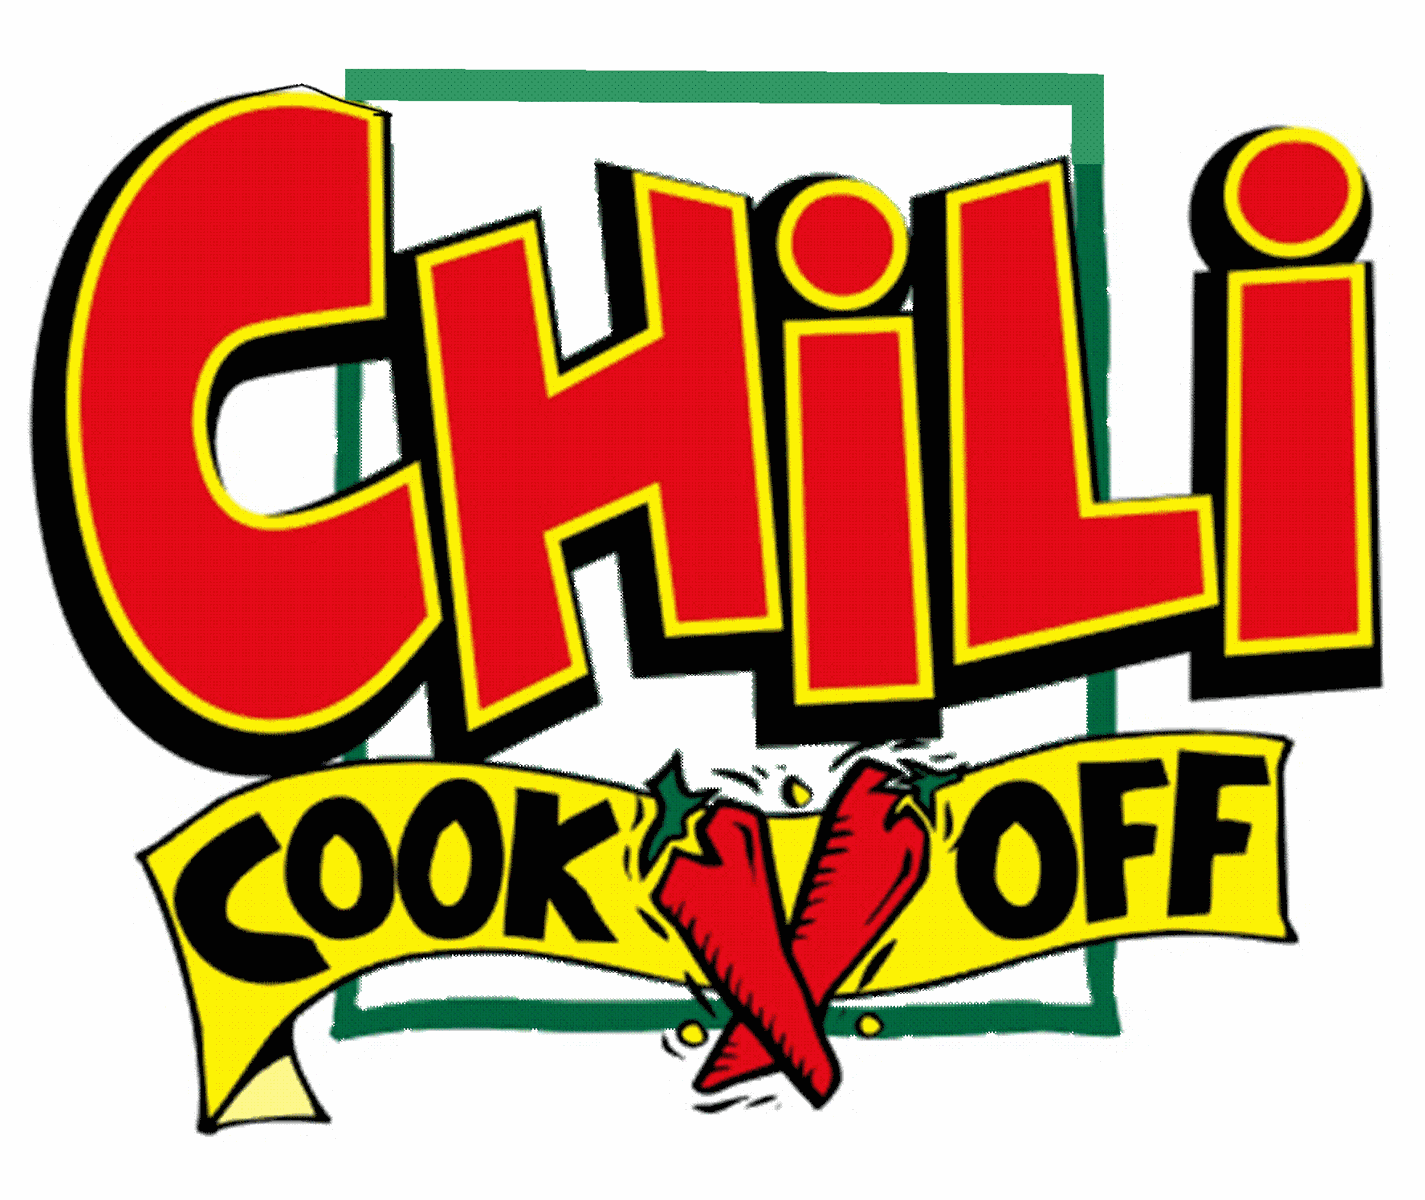 Chili Cookoff Clip Art - Clipart library